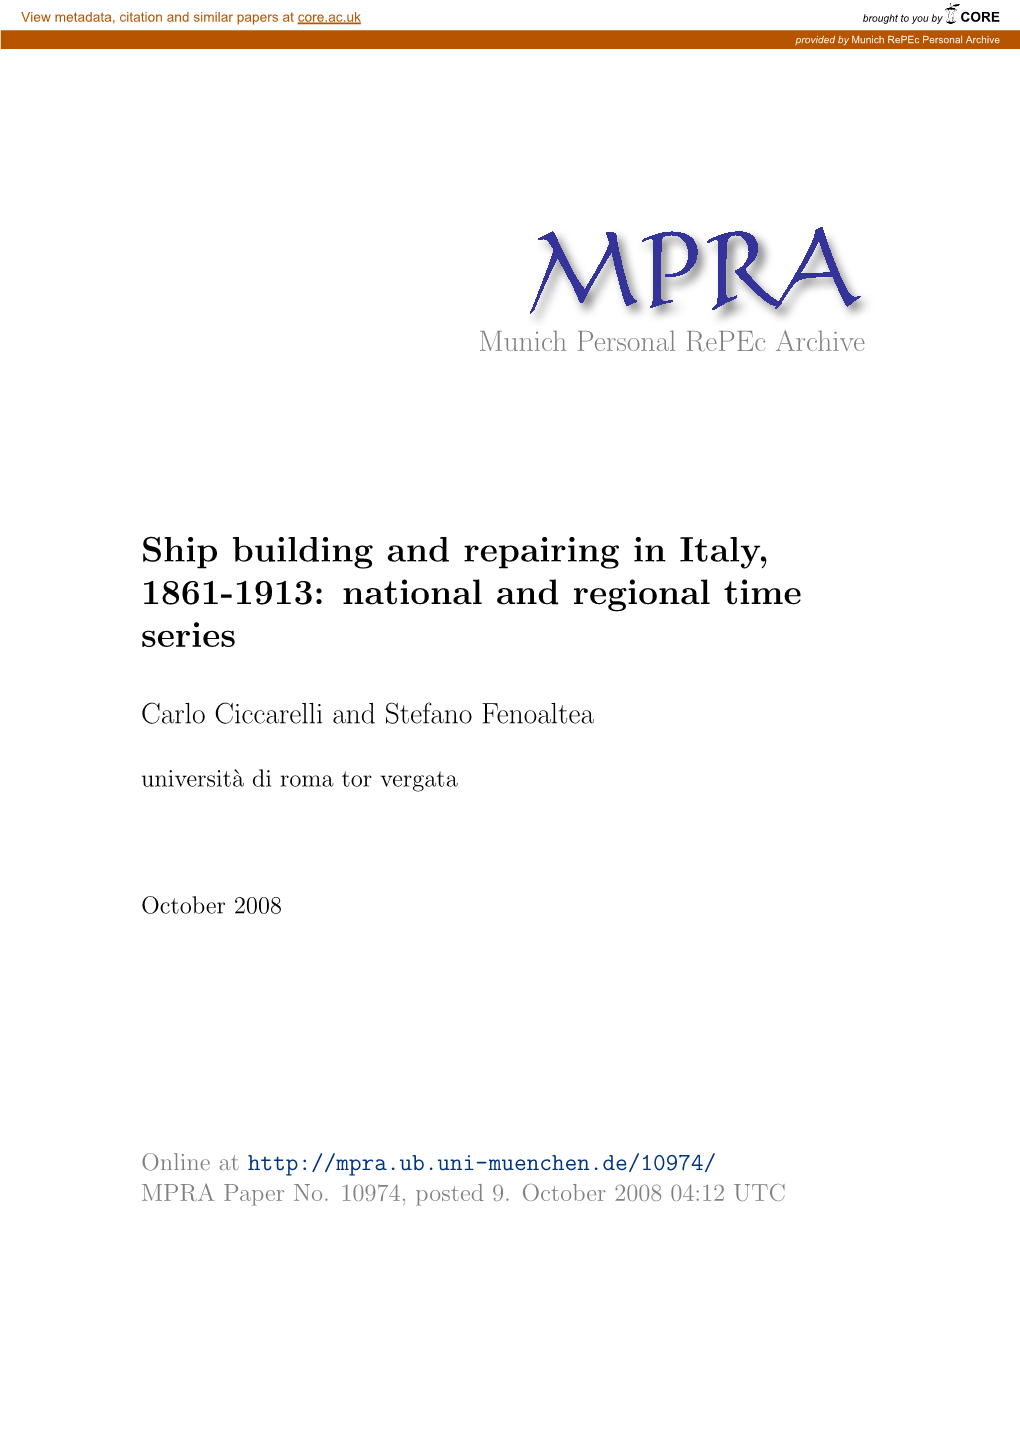 Ship Building and Repairing in Italy, 1861-1913: National and Regional Time Series